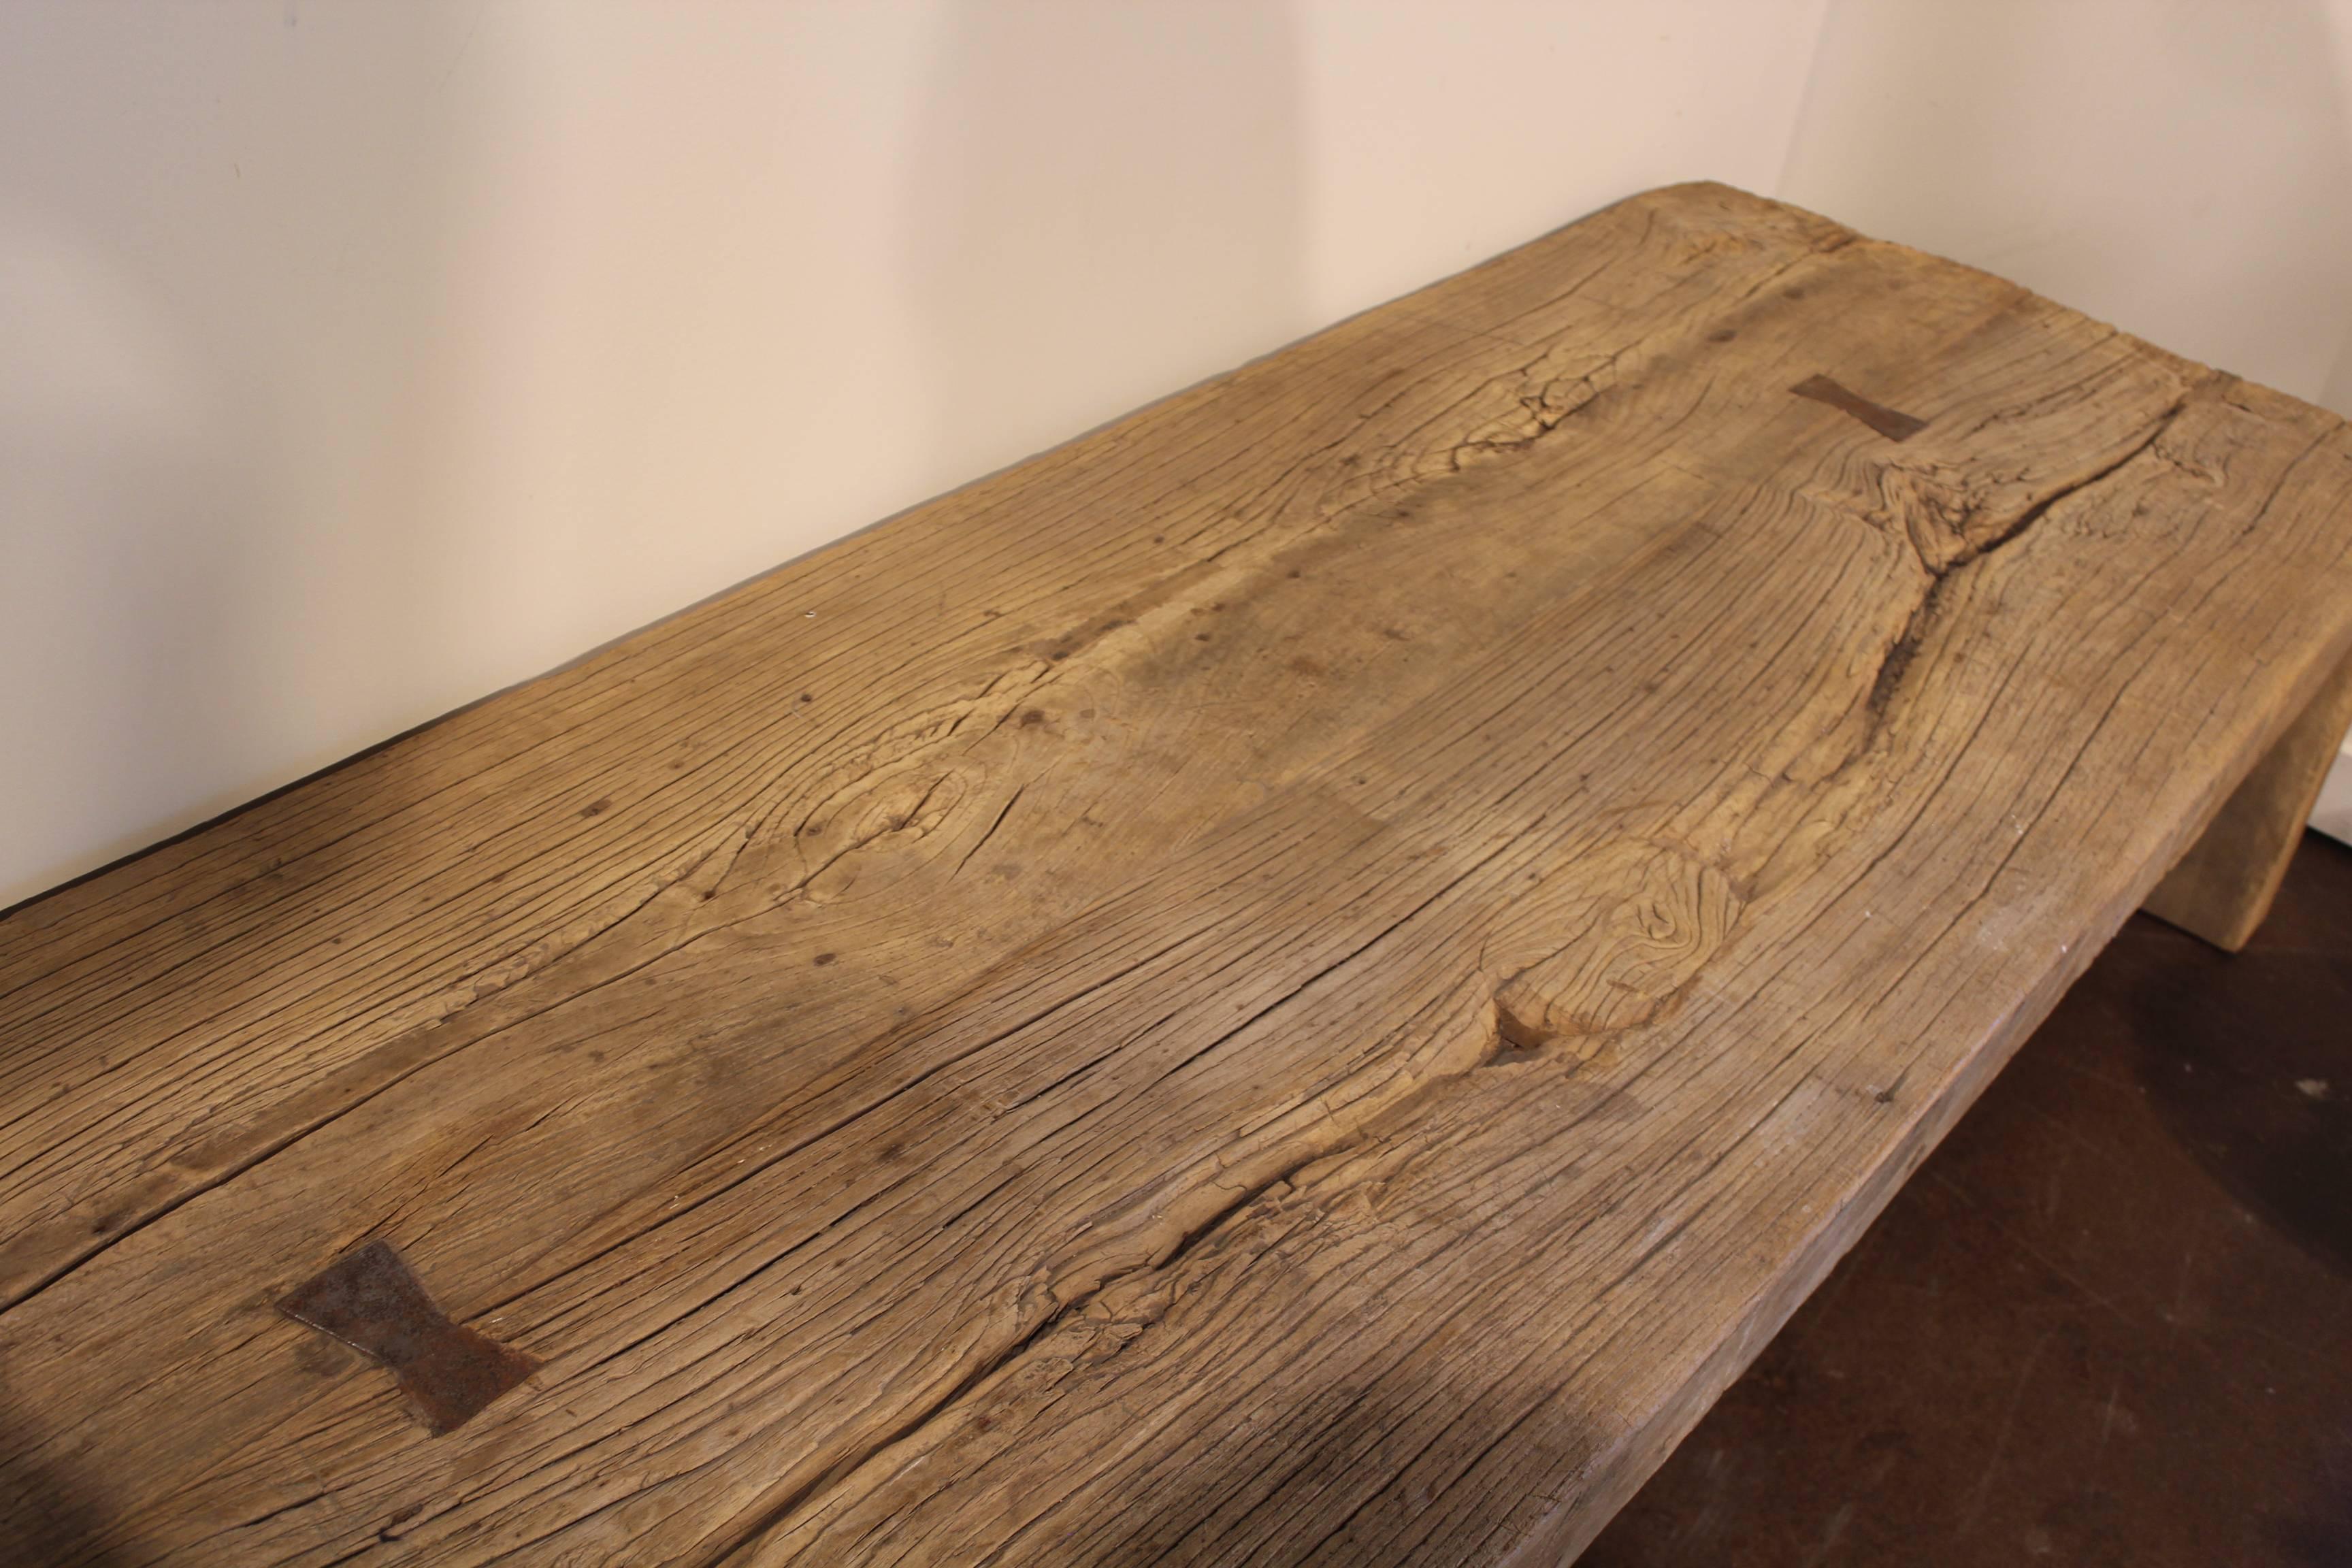 Coffee table in the Wabi Sabi Aesthetic. Made from reclaimed elm.